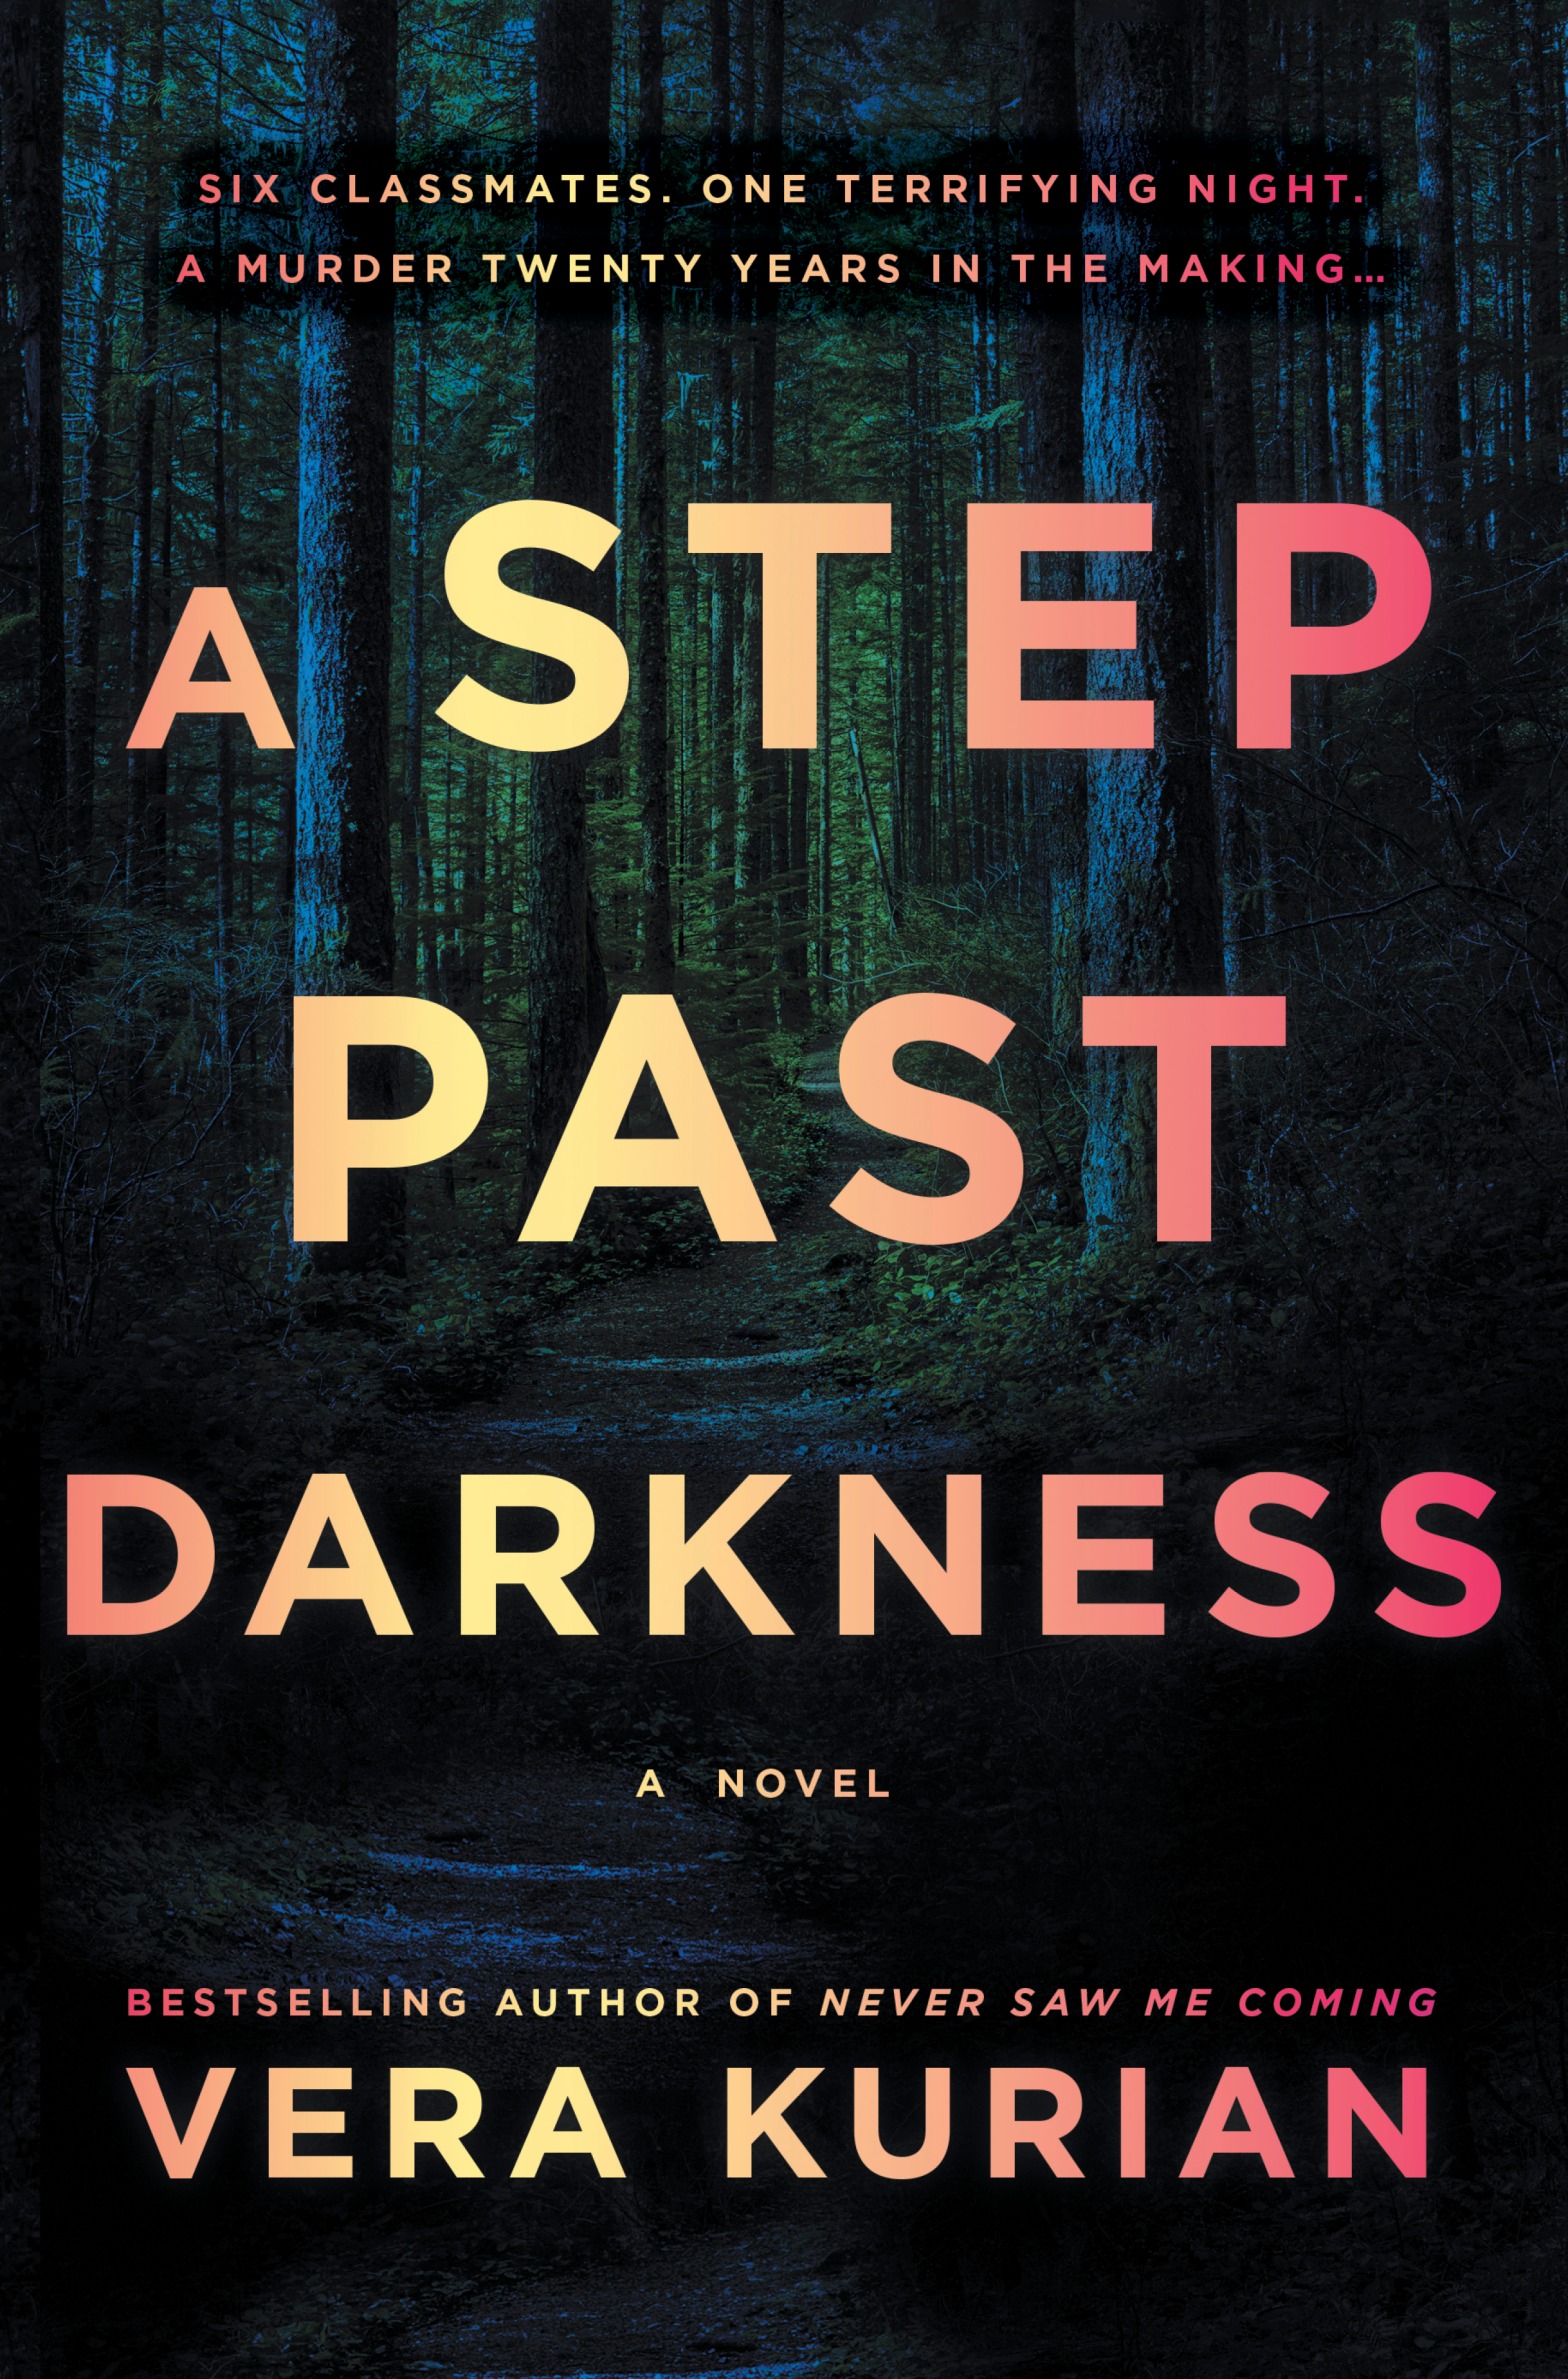 A STEP PAST DARKNESS by Vera Kurian blog tour and book excerpt